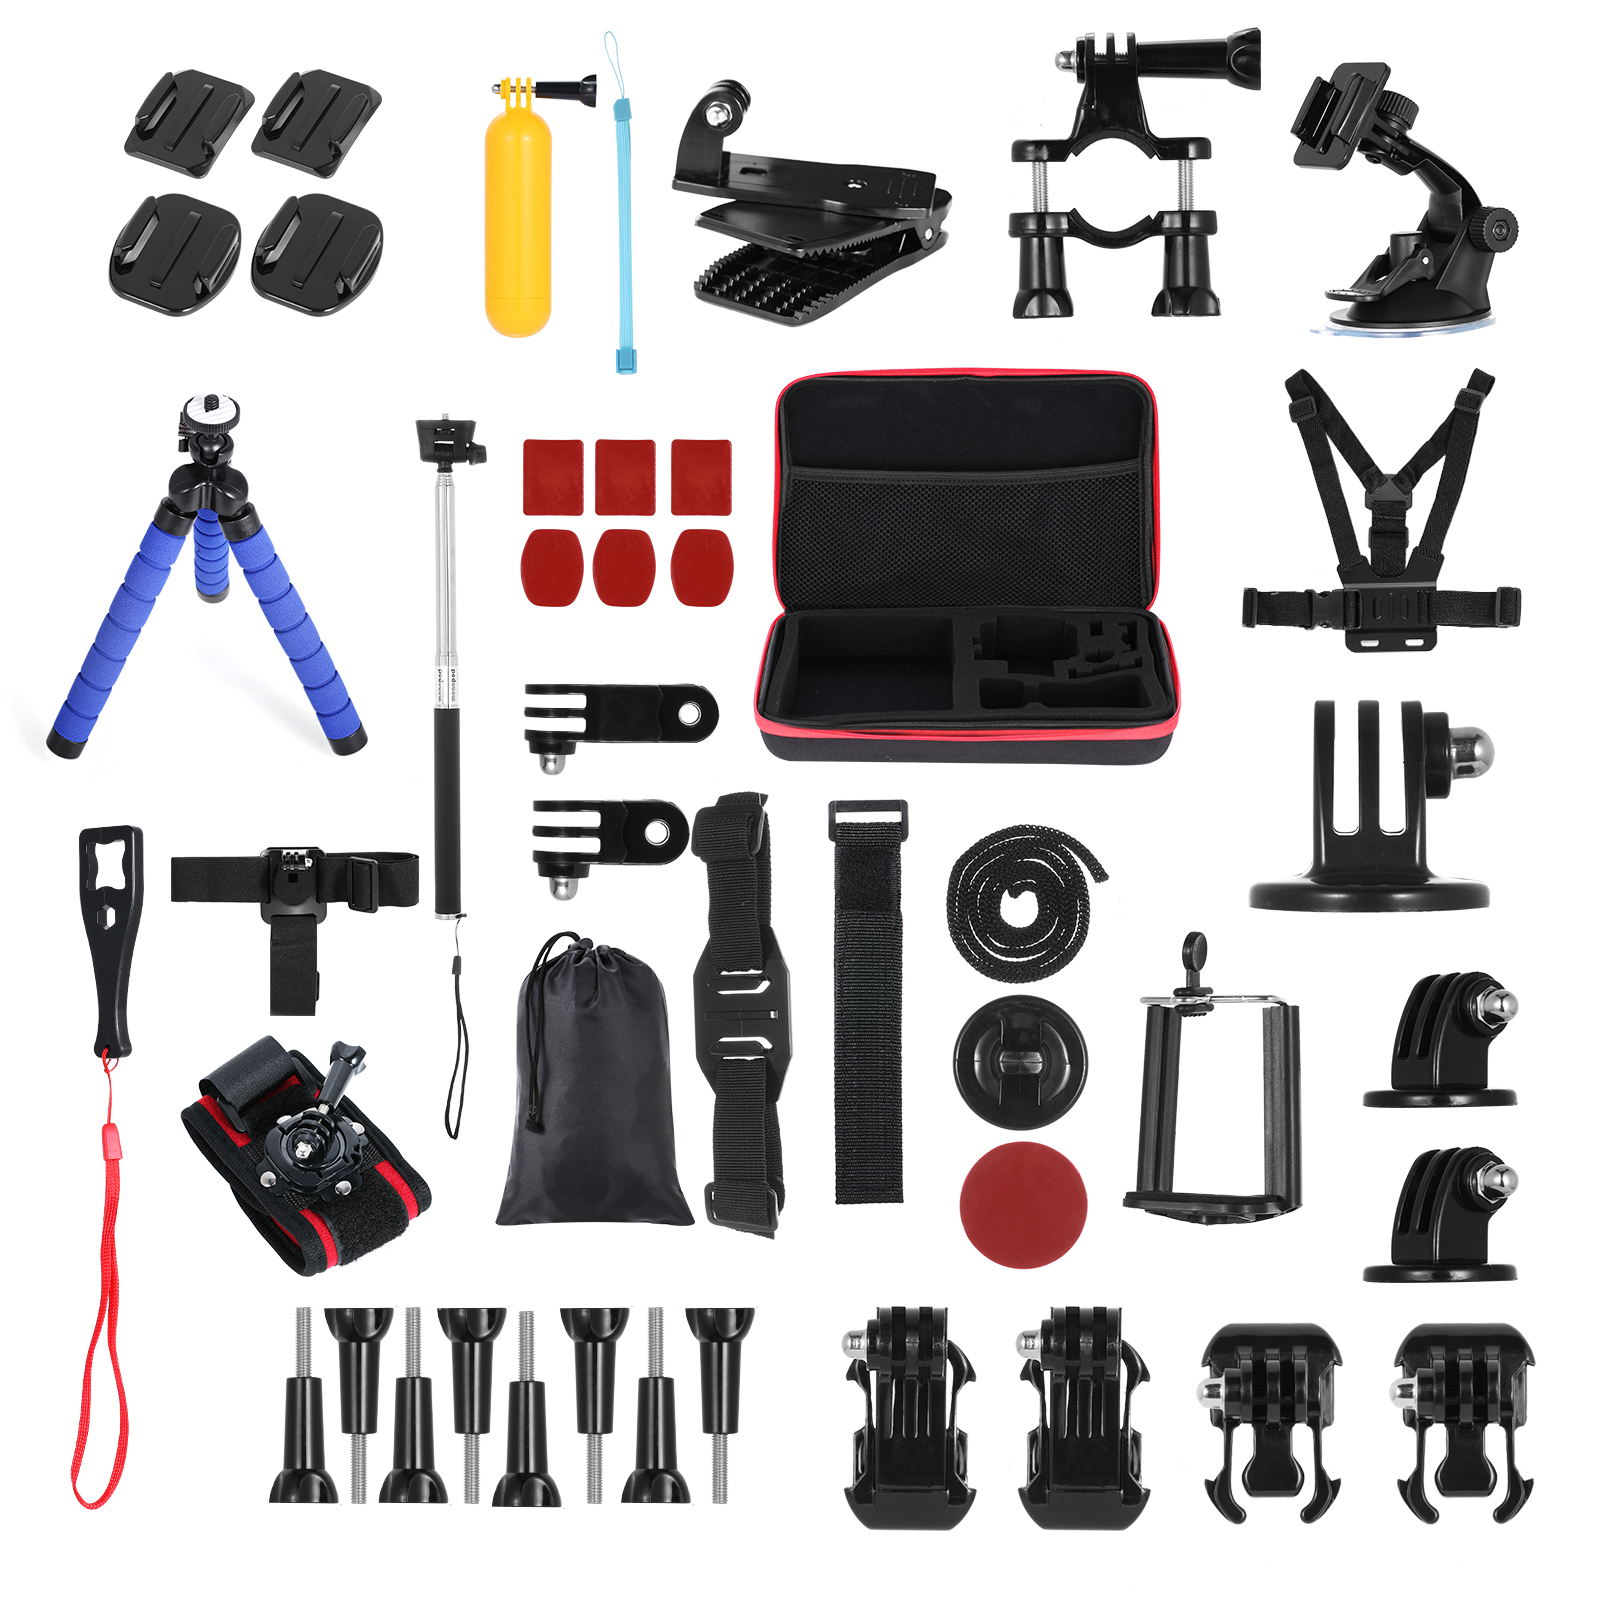 Andoer 48-in-1 Action Camera Accessories Kit Sports Camera Accessories Set